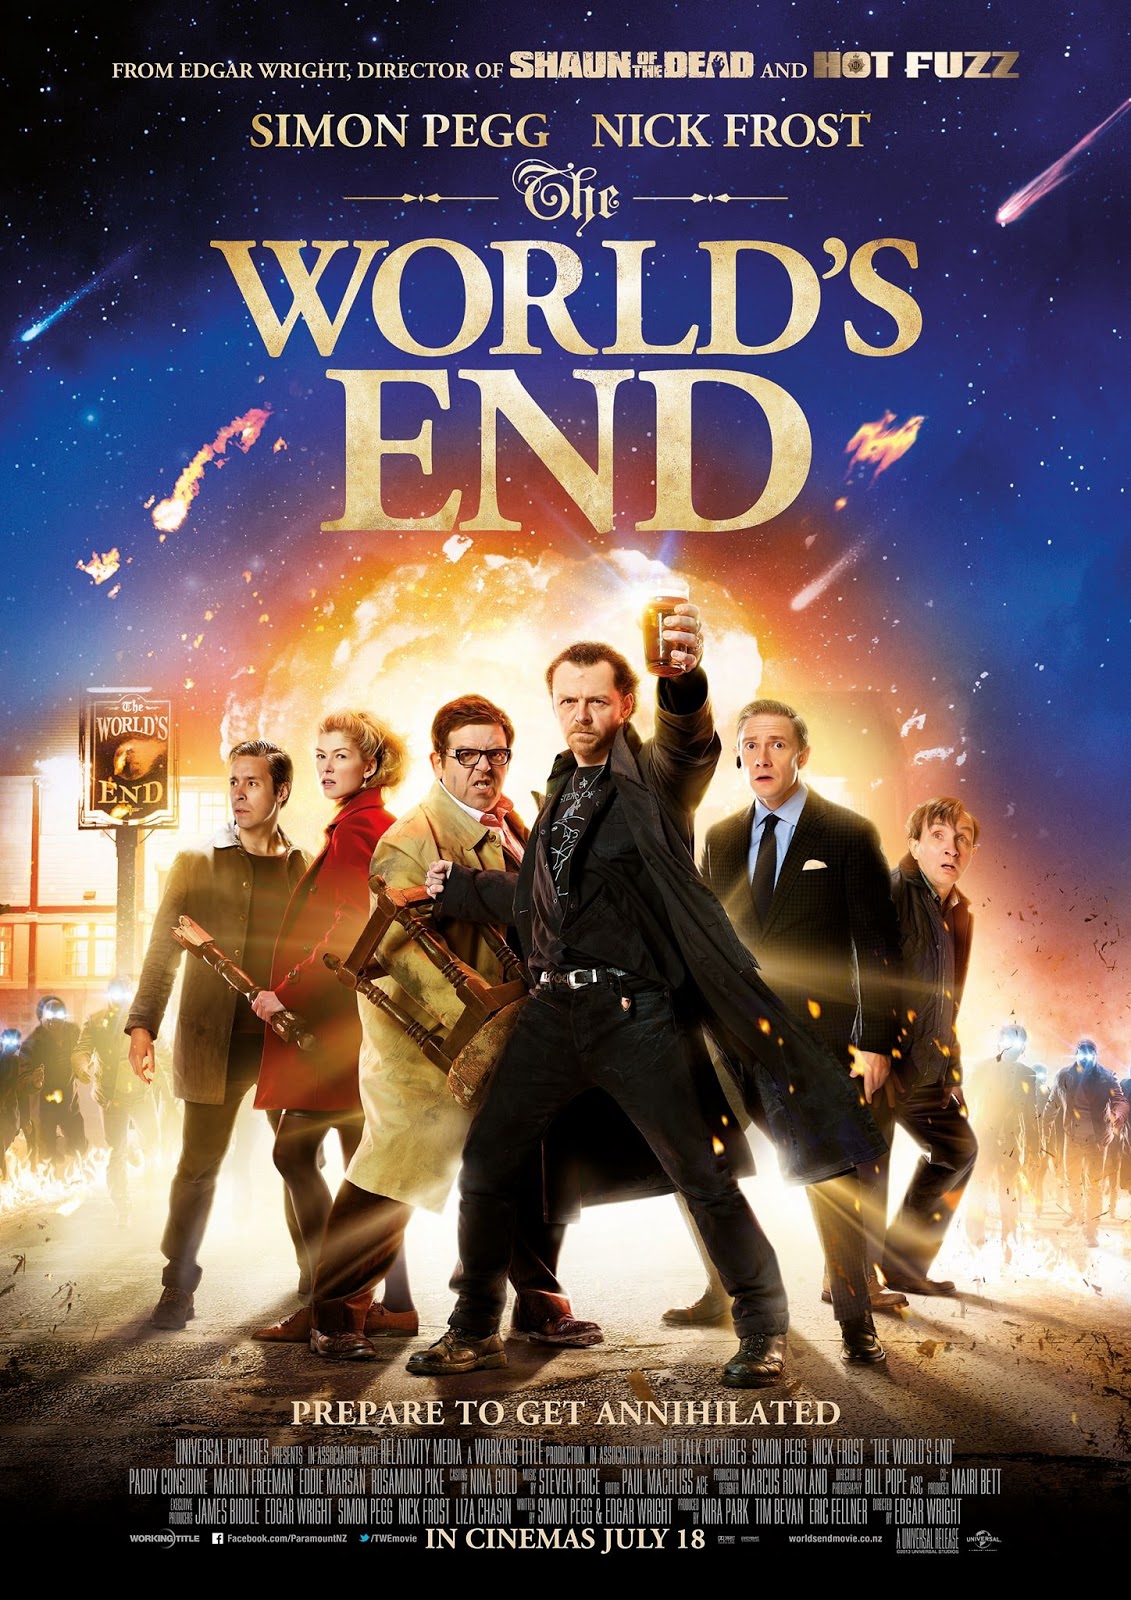 The Geeky Guide to Nearly Everything: [Movies] The World's End (2013)